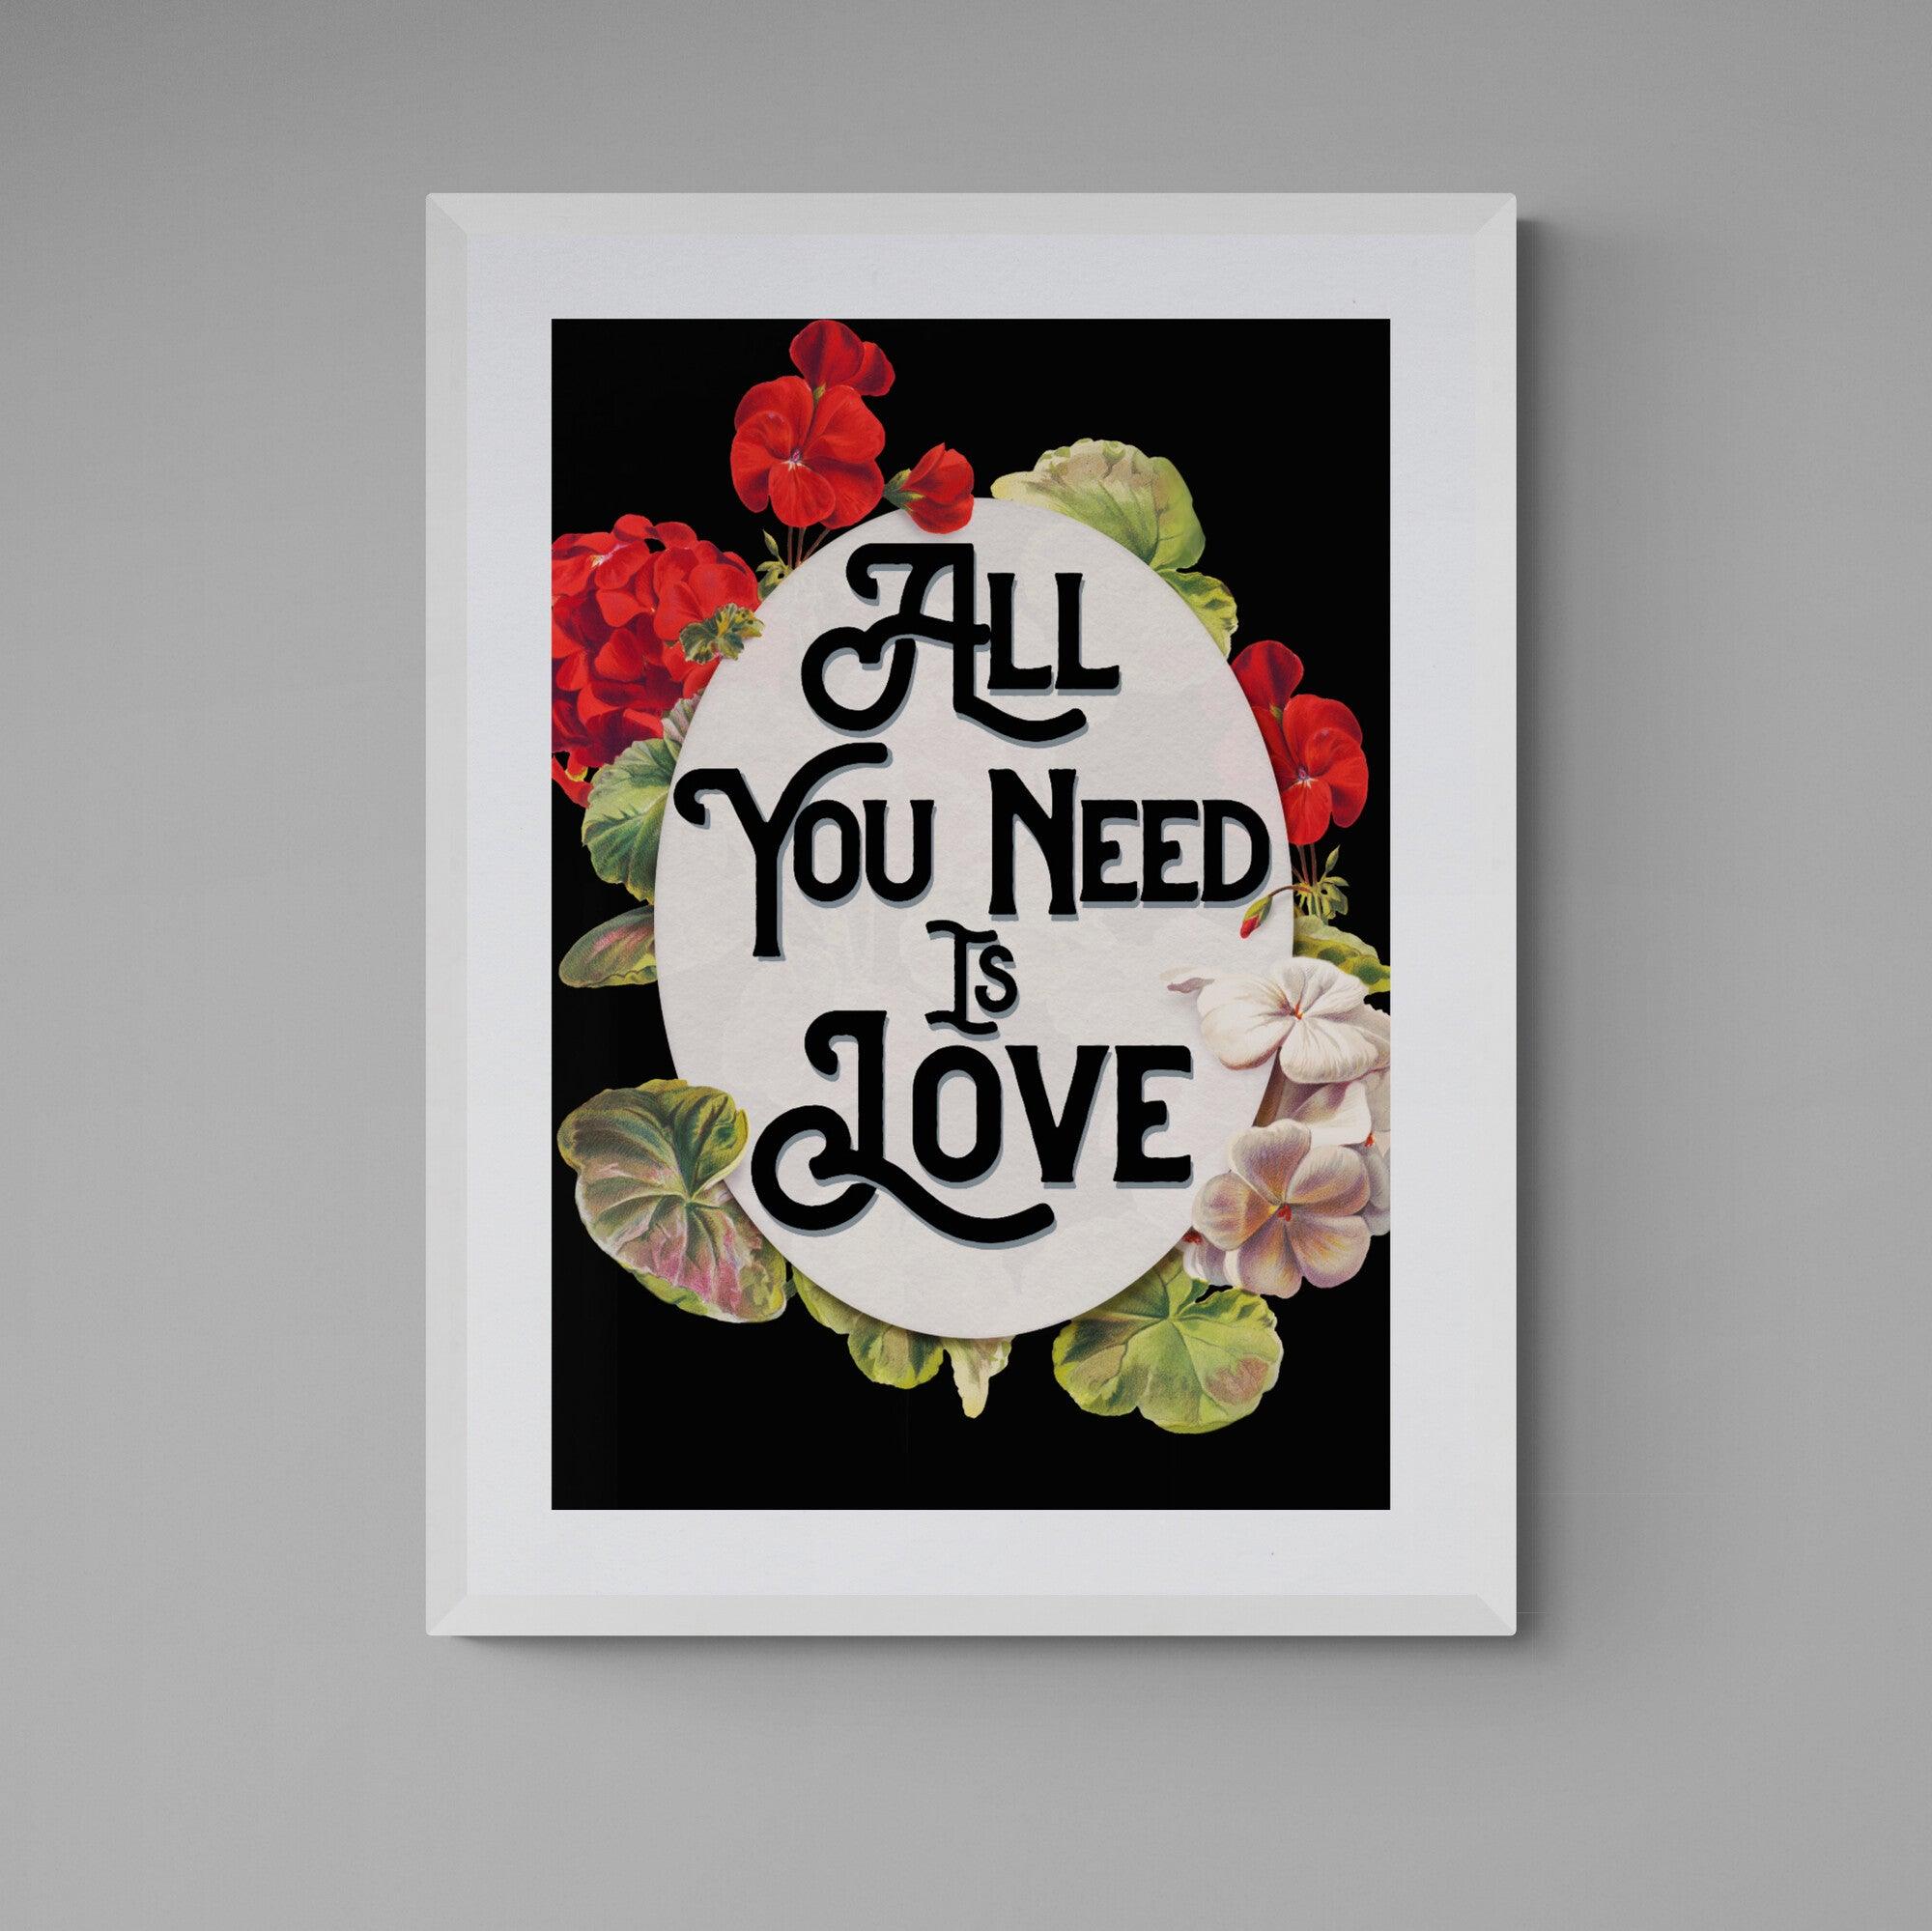 https://www.inknorth.com/cdn/shop/files/all-you-need-is-love-song-lyric-music-poster-wall-art-print-ink-north-5.jpg?v=1692692935&width=370%20370w